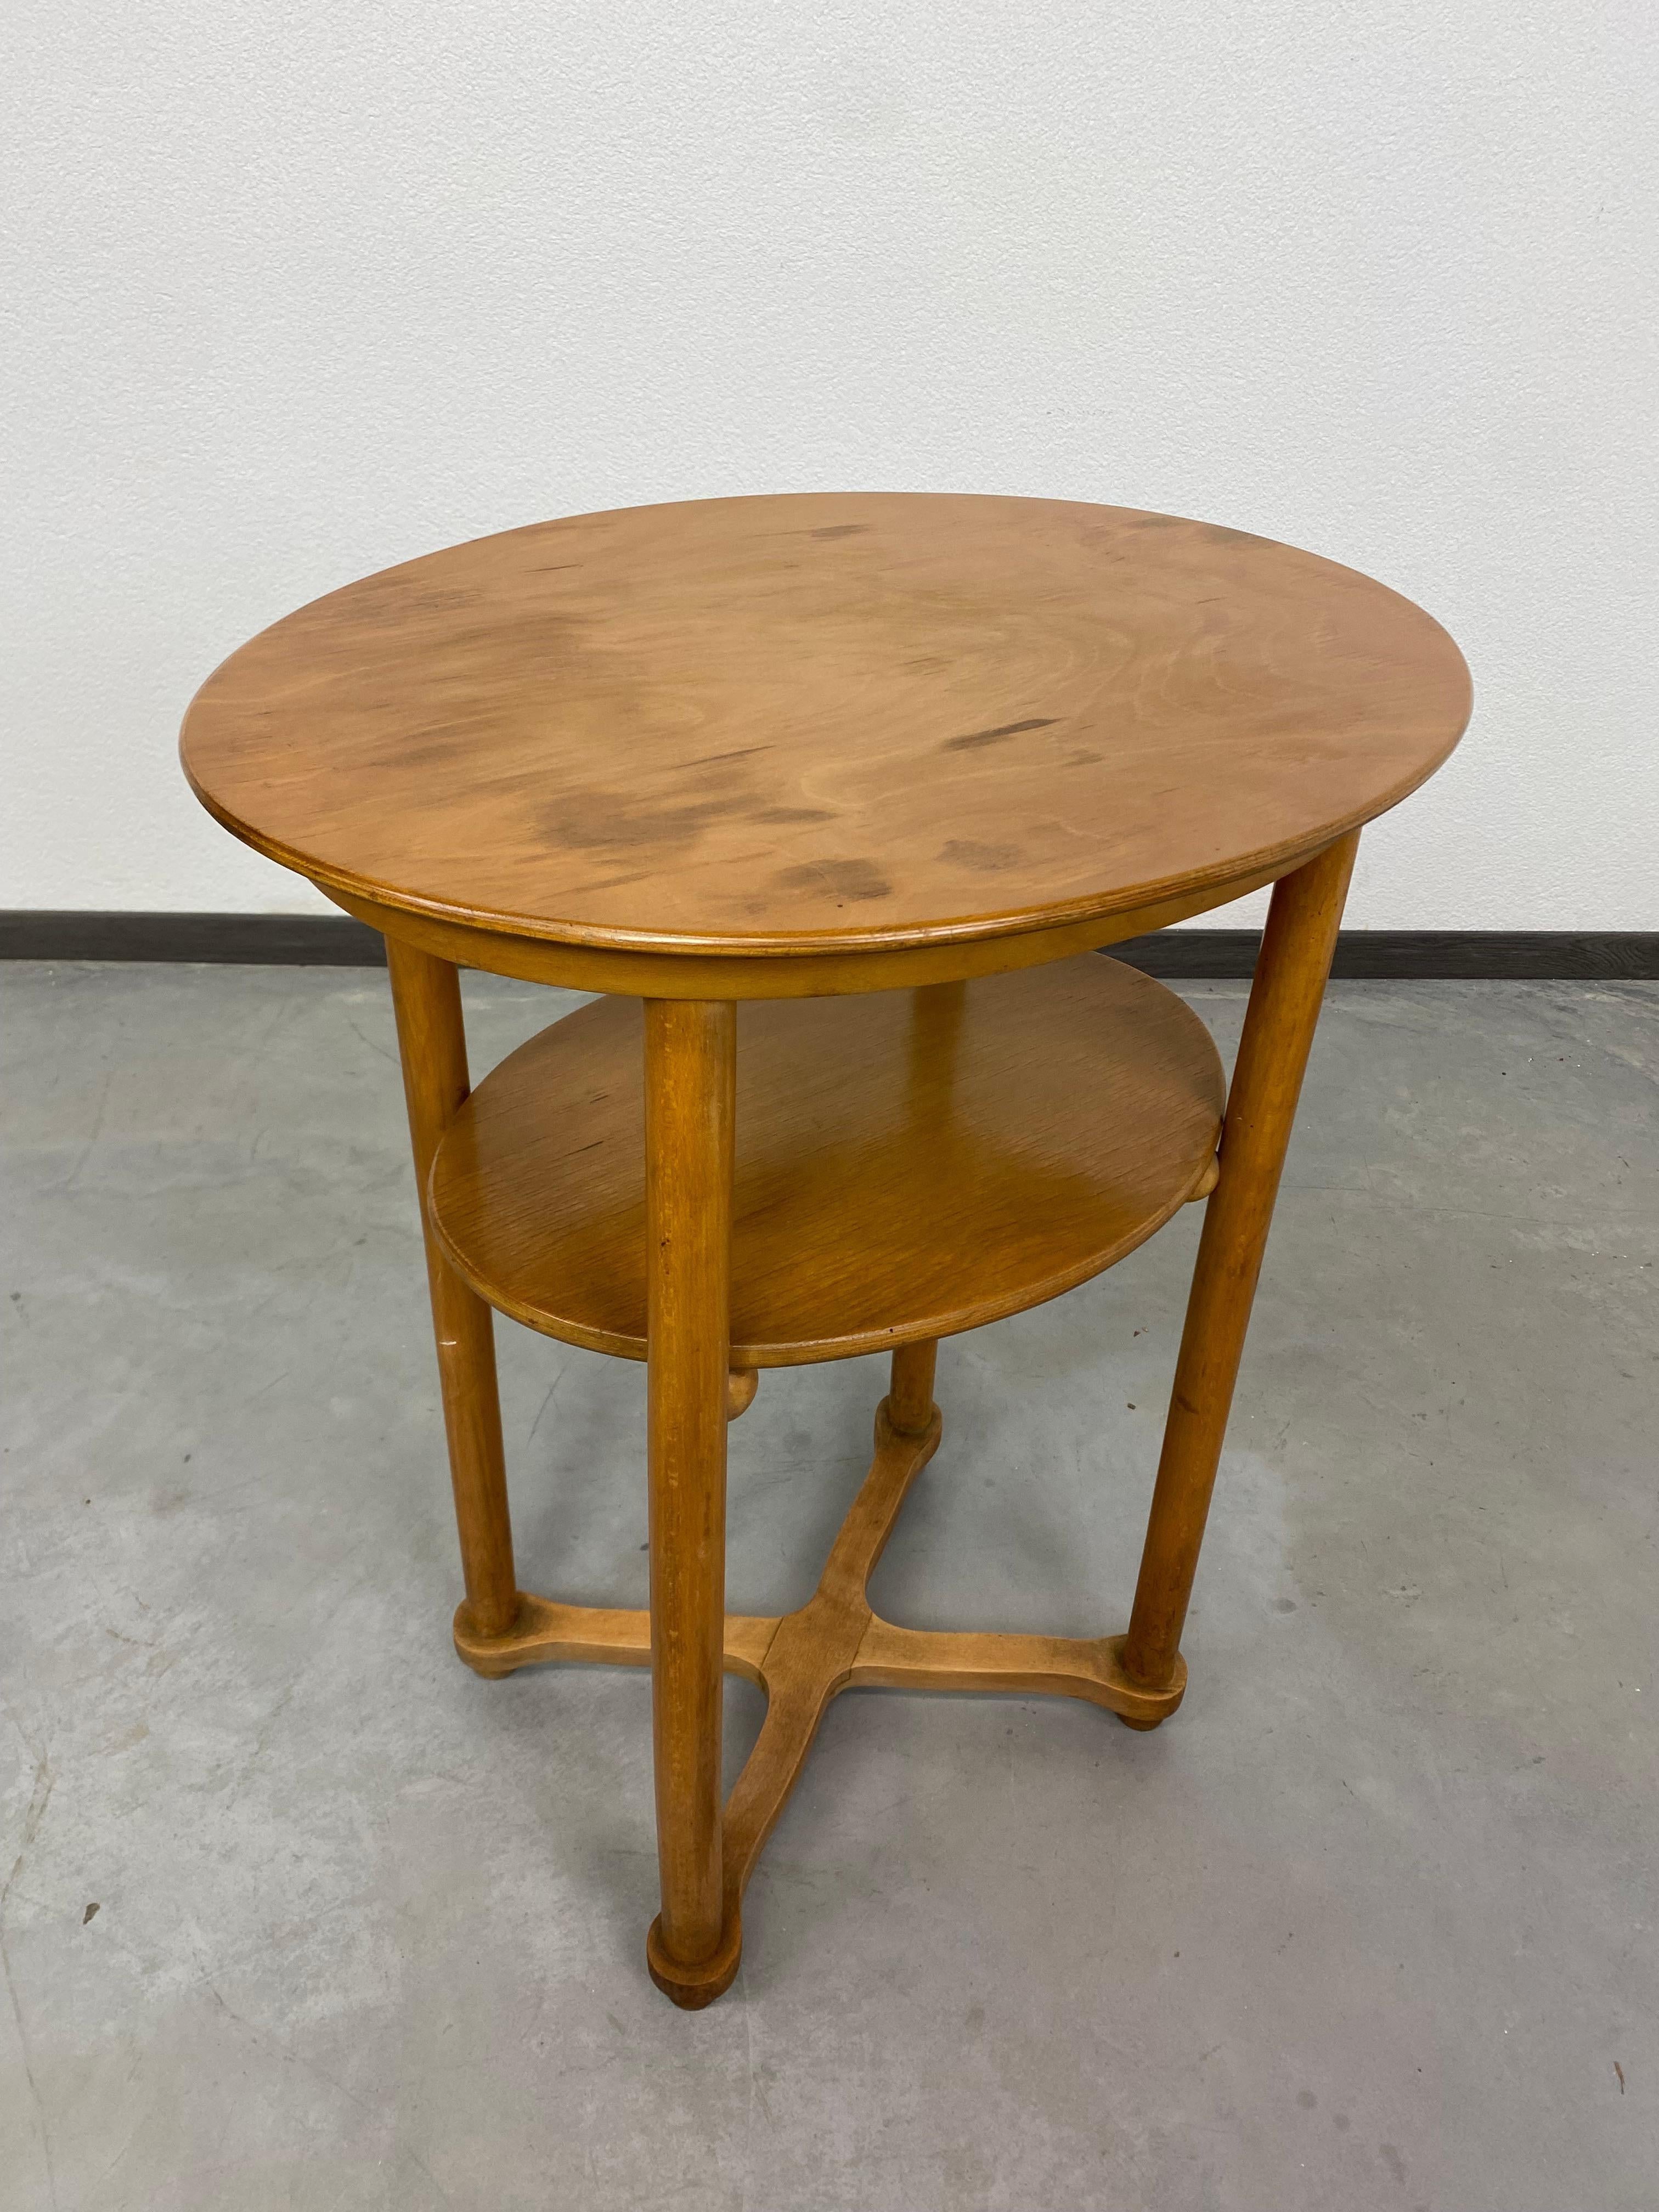 Early 20th Century Oval Table Nr.362 by Josef Hoffmann by Thonet Mundus